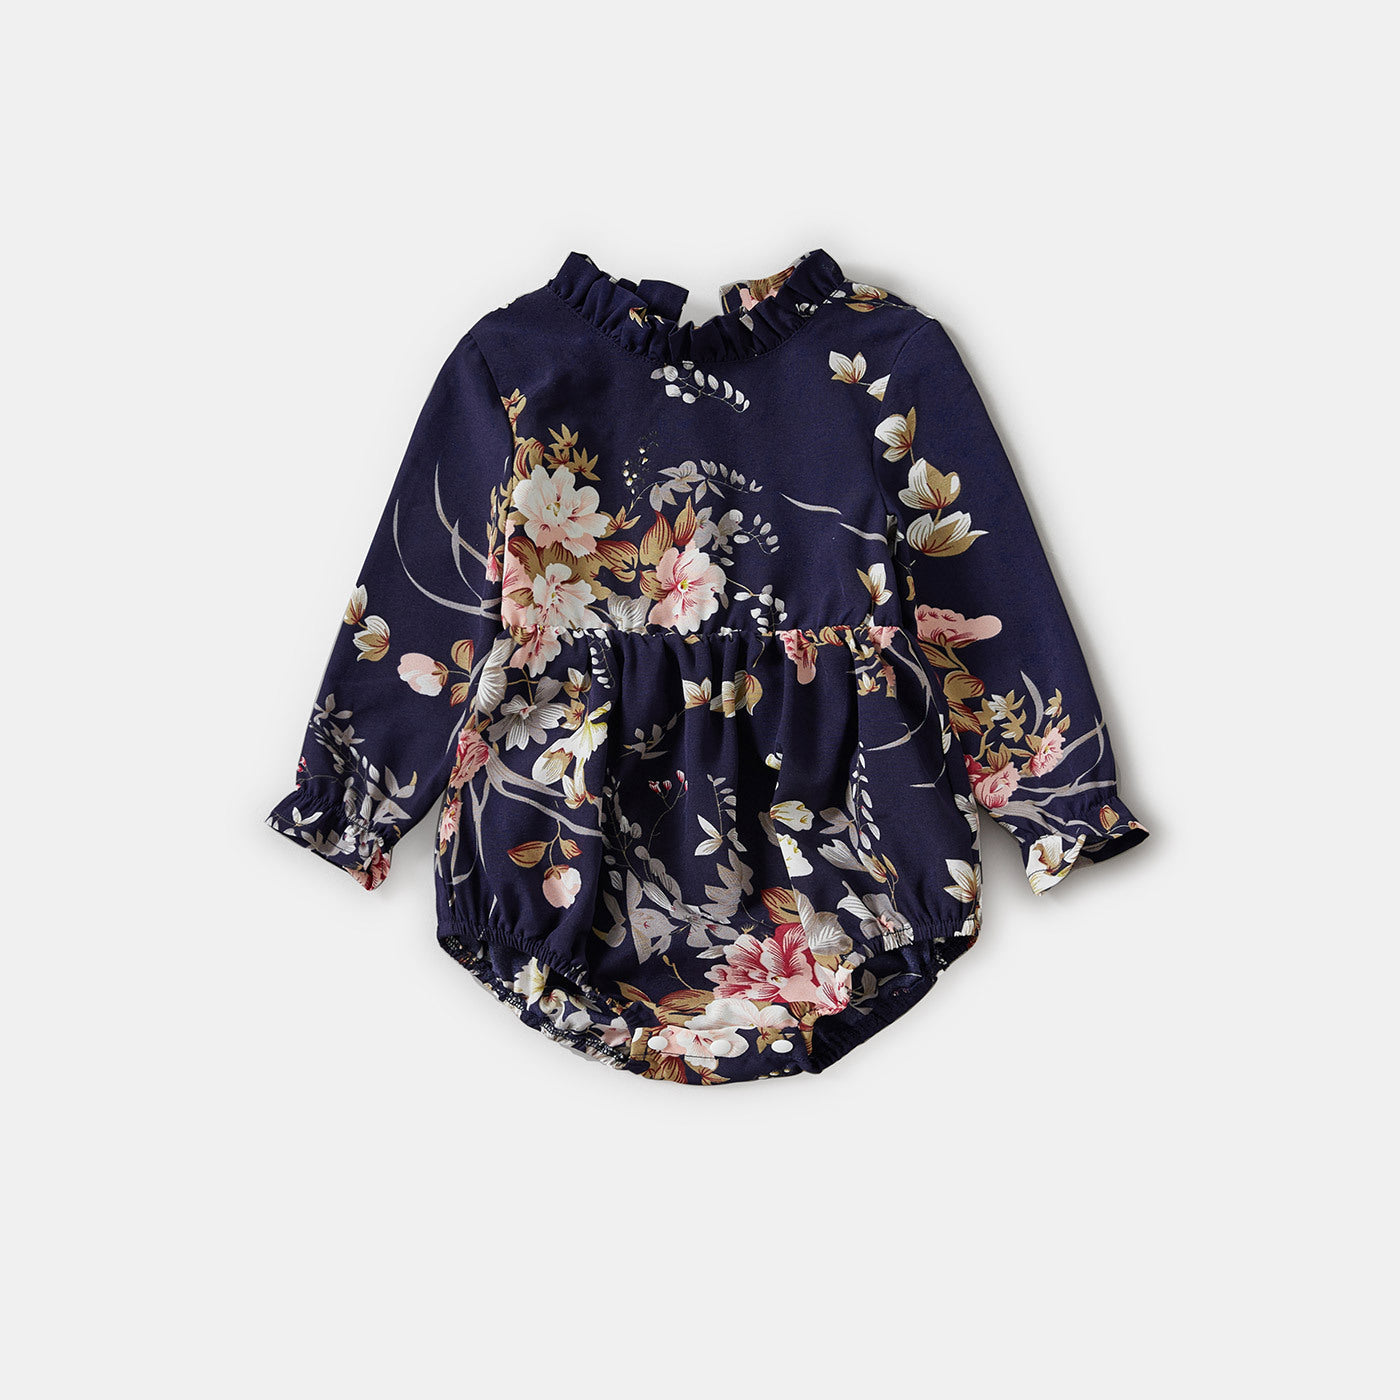 Floral Print Long-sleeve Dress for Mom and Me